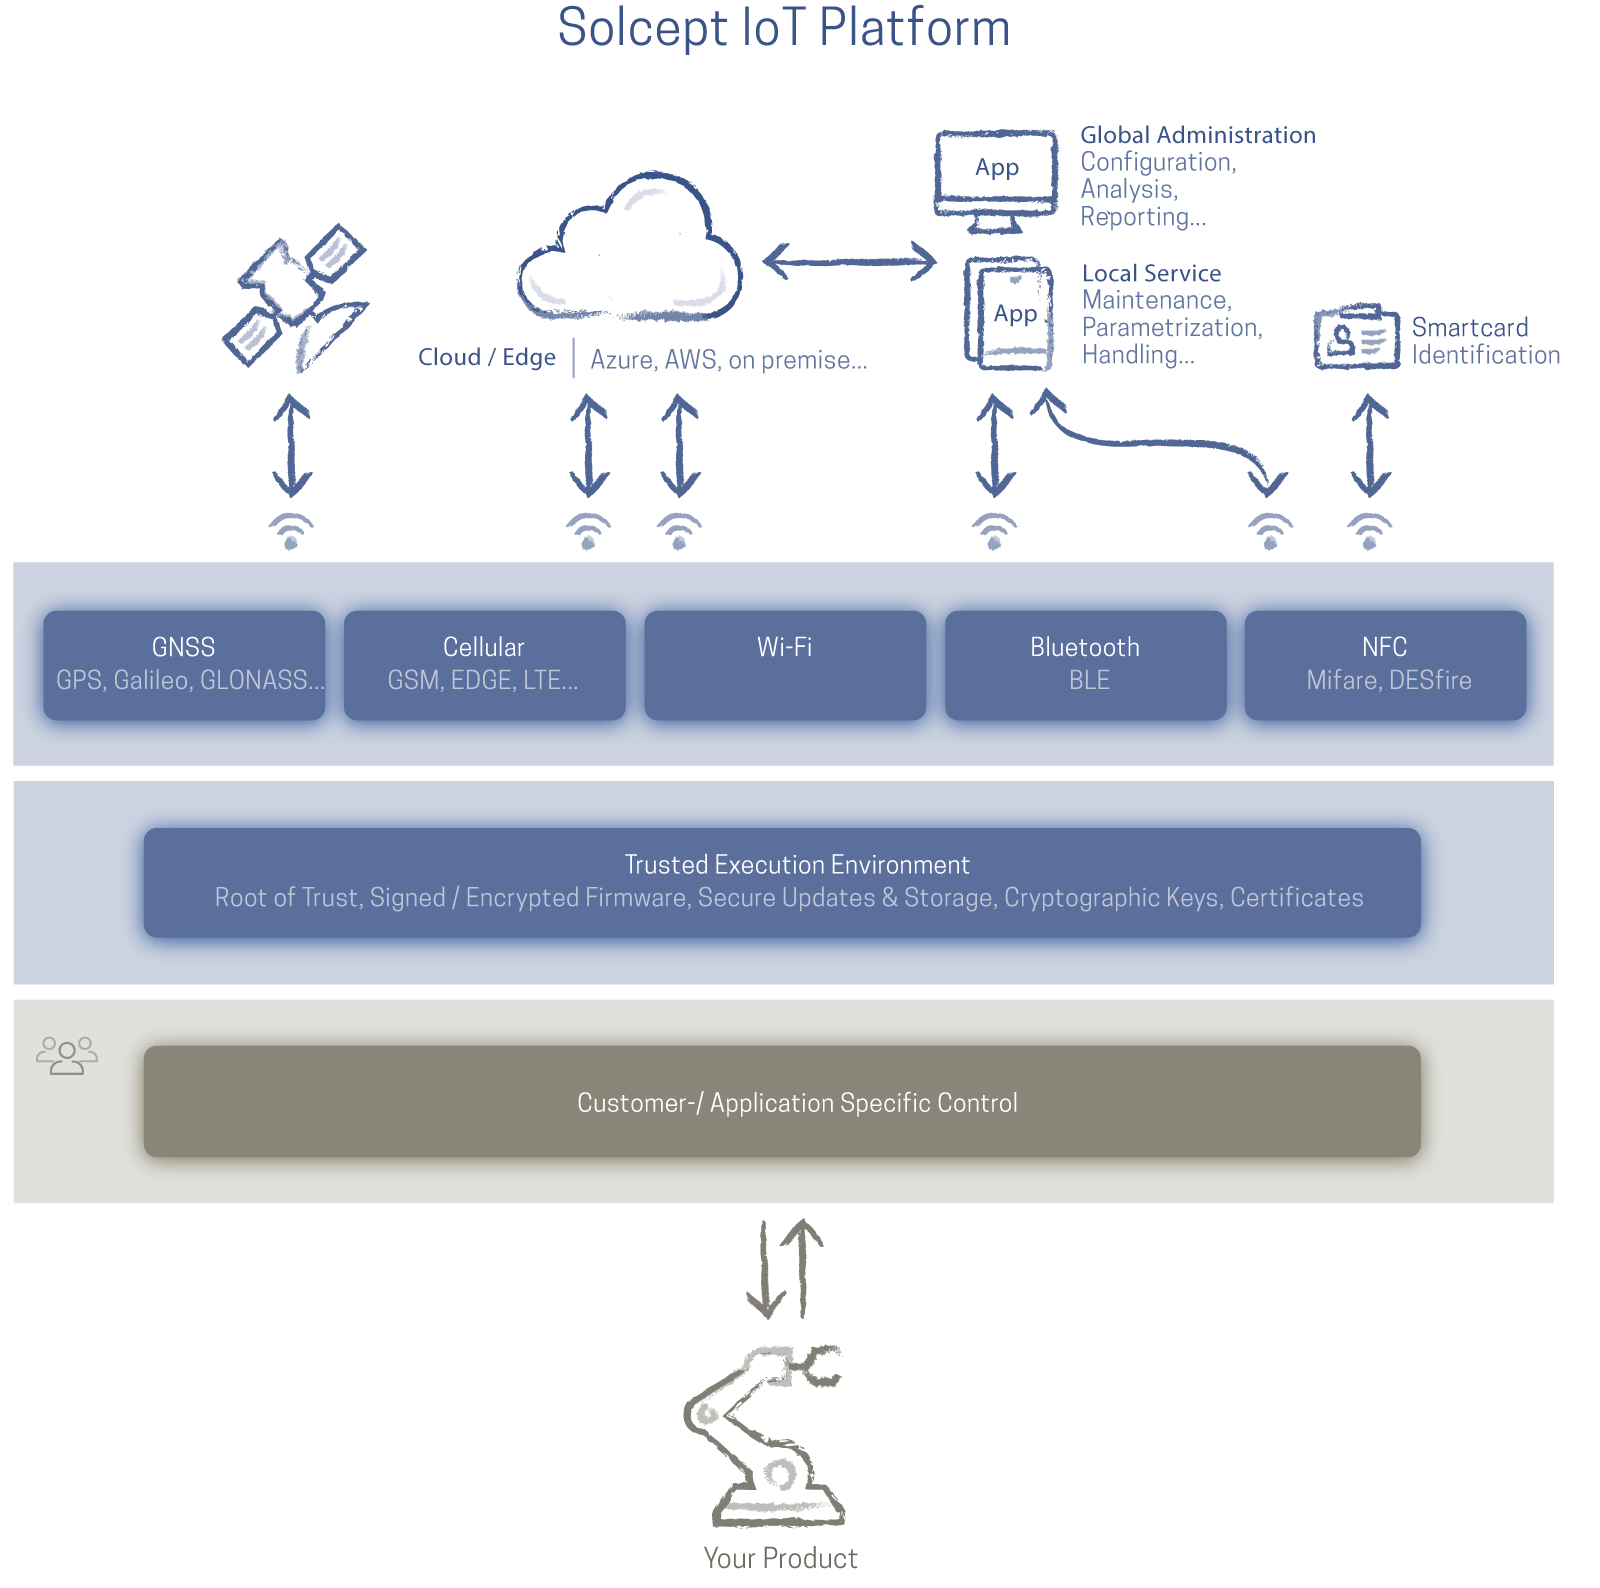 Graphical representation (block diagram) of the structure of the Solcept IoT Platform